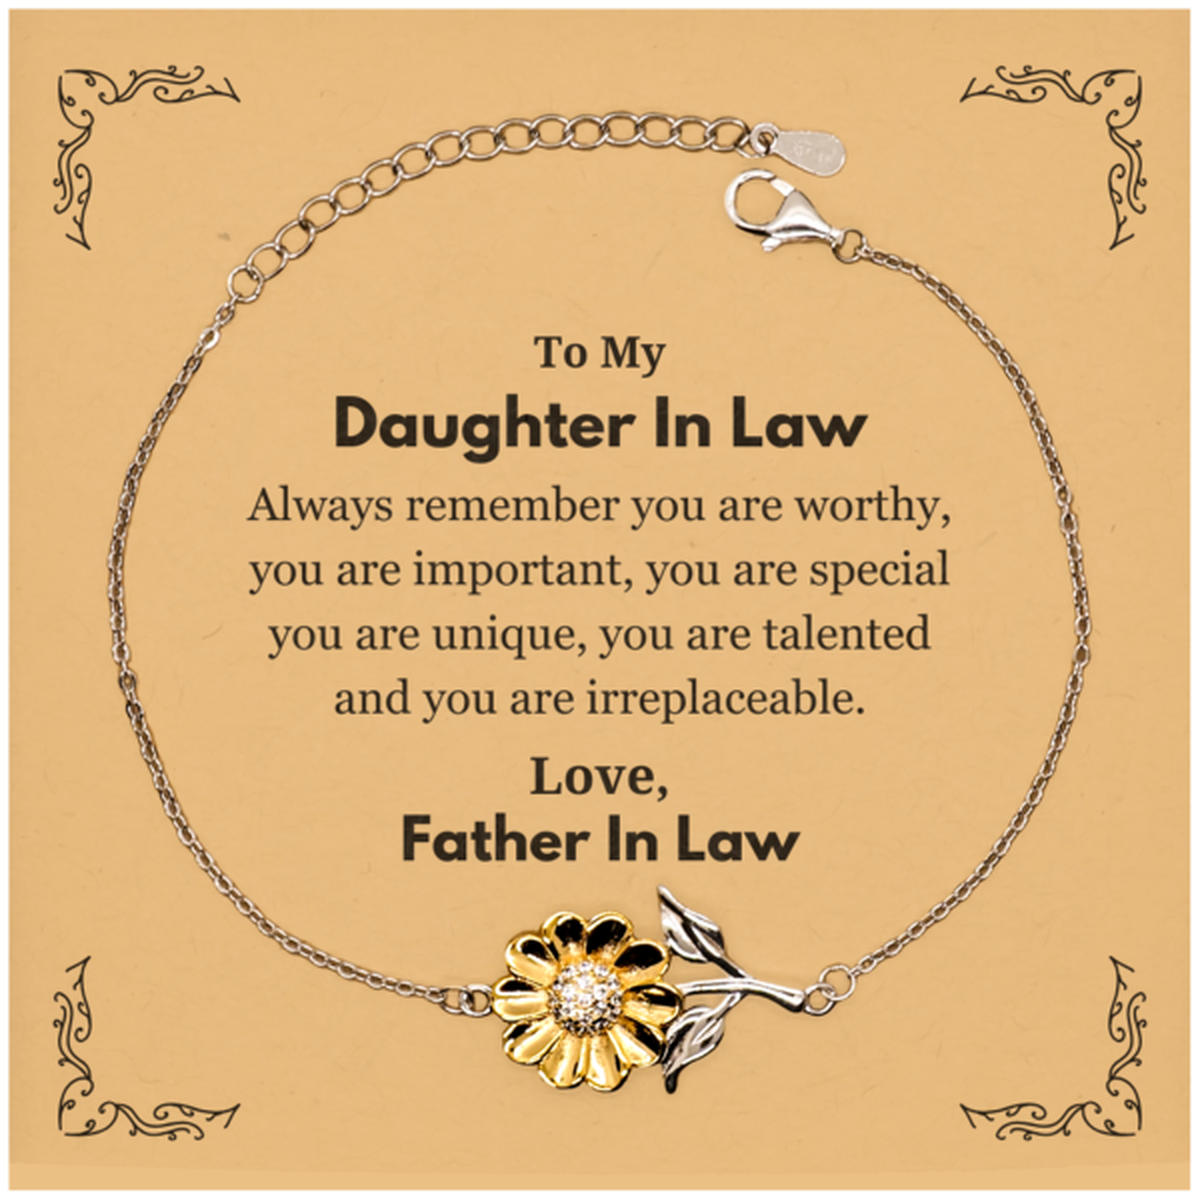 Daughter In Law Birthday Gifts from Father In Law, Inspirational Sunflower Bracelet for Daughter In Law Christmas Graduation Gifts for Daughter In Law Always remember you are worthy, you are important. Love, Father In Law